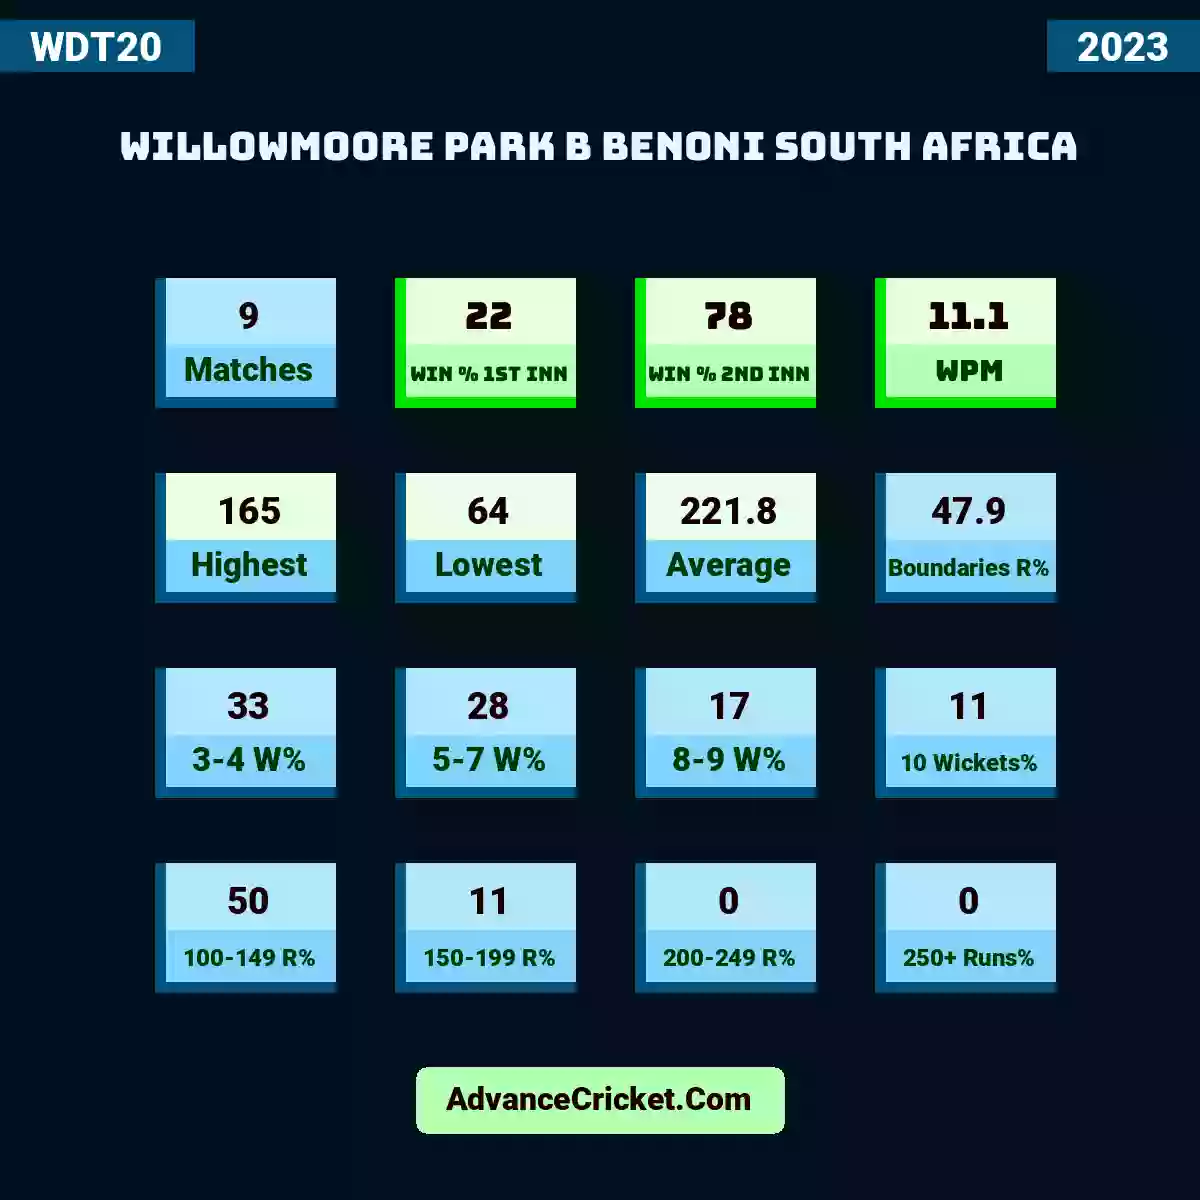 Image showing Willowmoore Park B Benoni South Africa with Matches: 9, Win % 1st Inn: 22, Win % 2nd Inn: 78, WPM: 11.1, Highest: 165, Lowest: 64, Average: 221.8, Boundaries R%: 47.9, 3-4 W%: 33, 5-7 W%: 28, 8-9 W%: 17, 10 Wickets%: 11, 100-149 R%: 50, 150-199 R%: 11, 200-249 R%: 0, 250+ Runs%: 0.